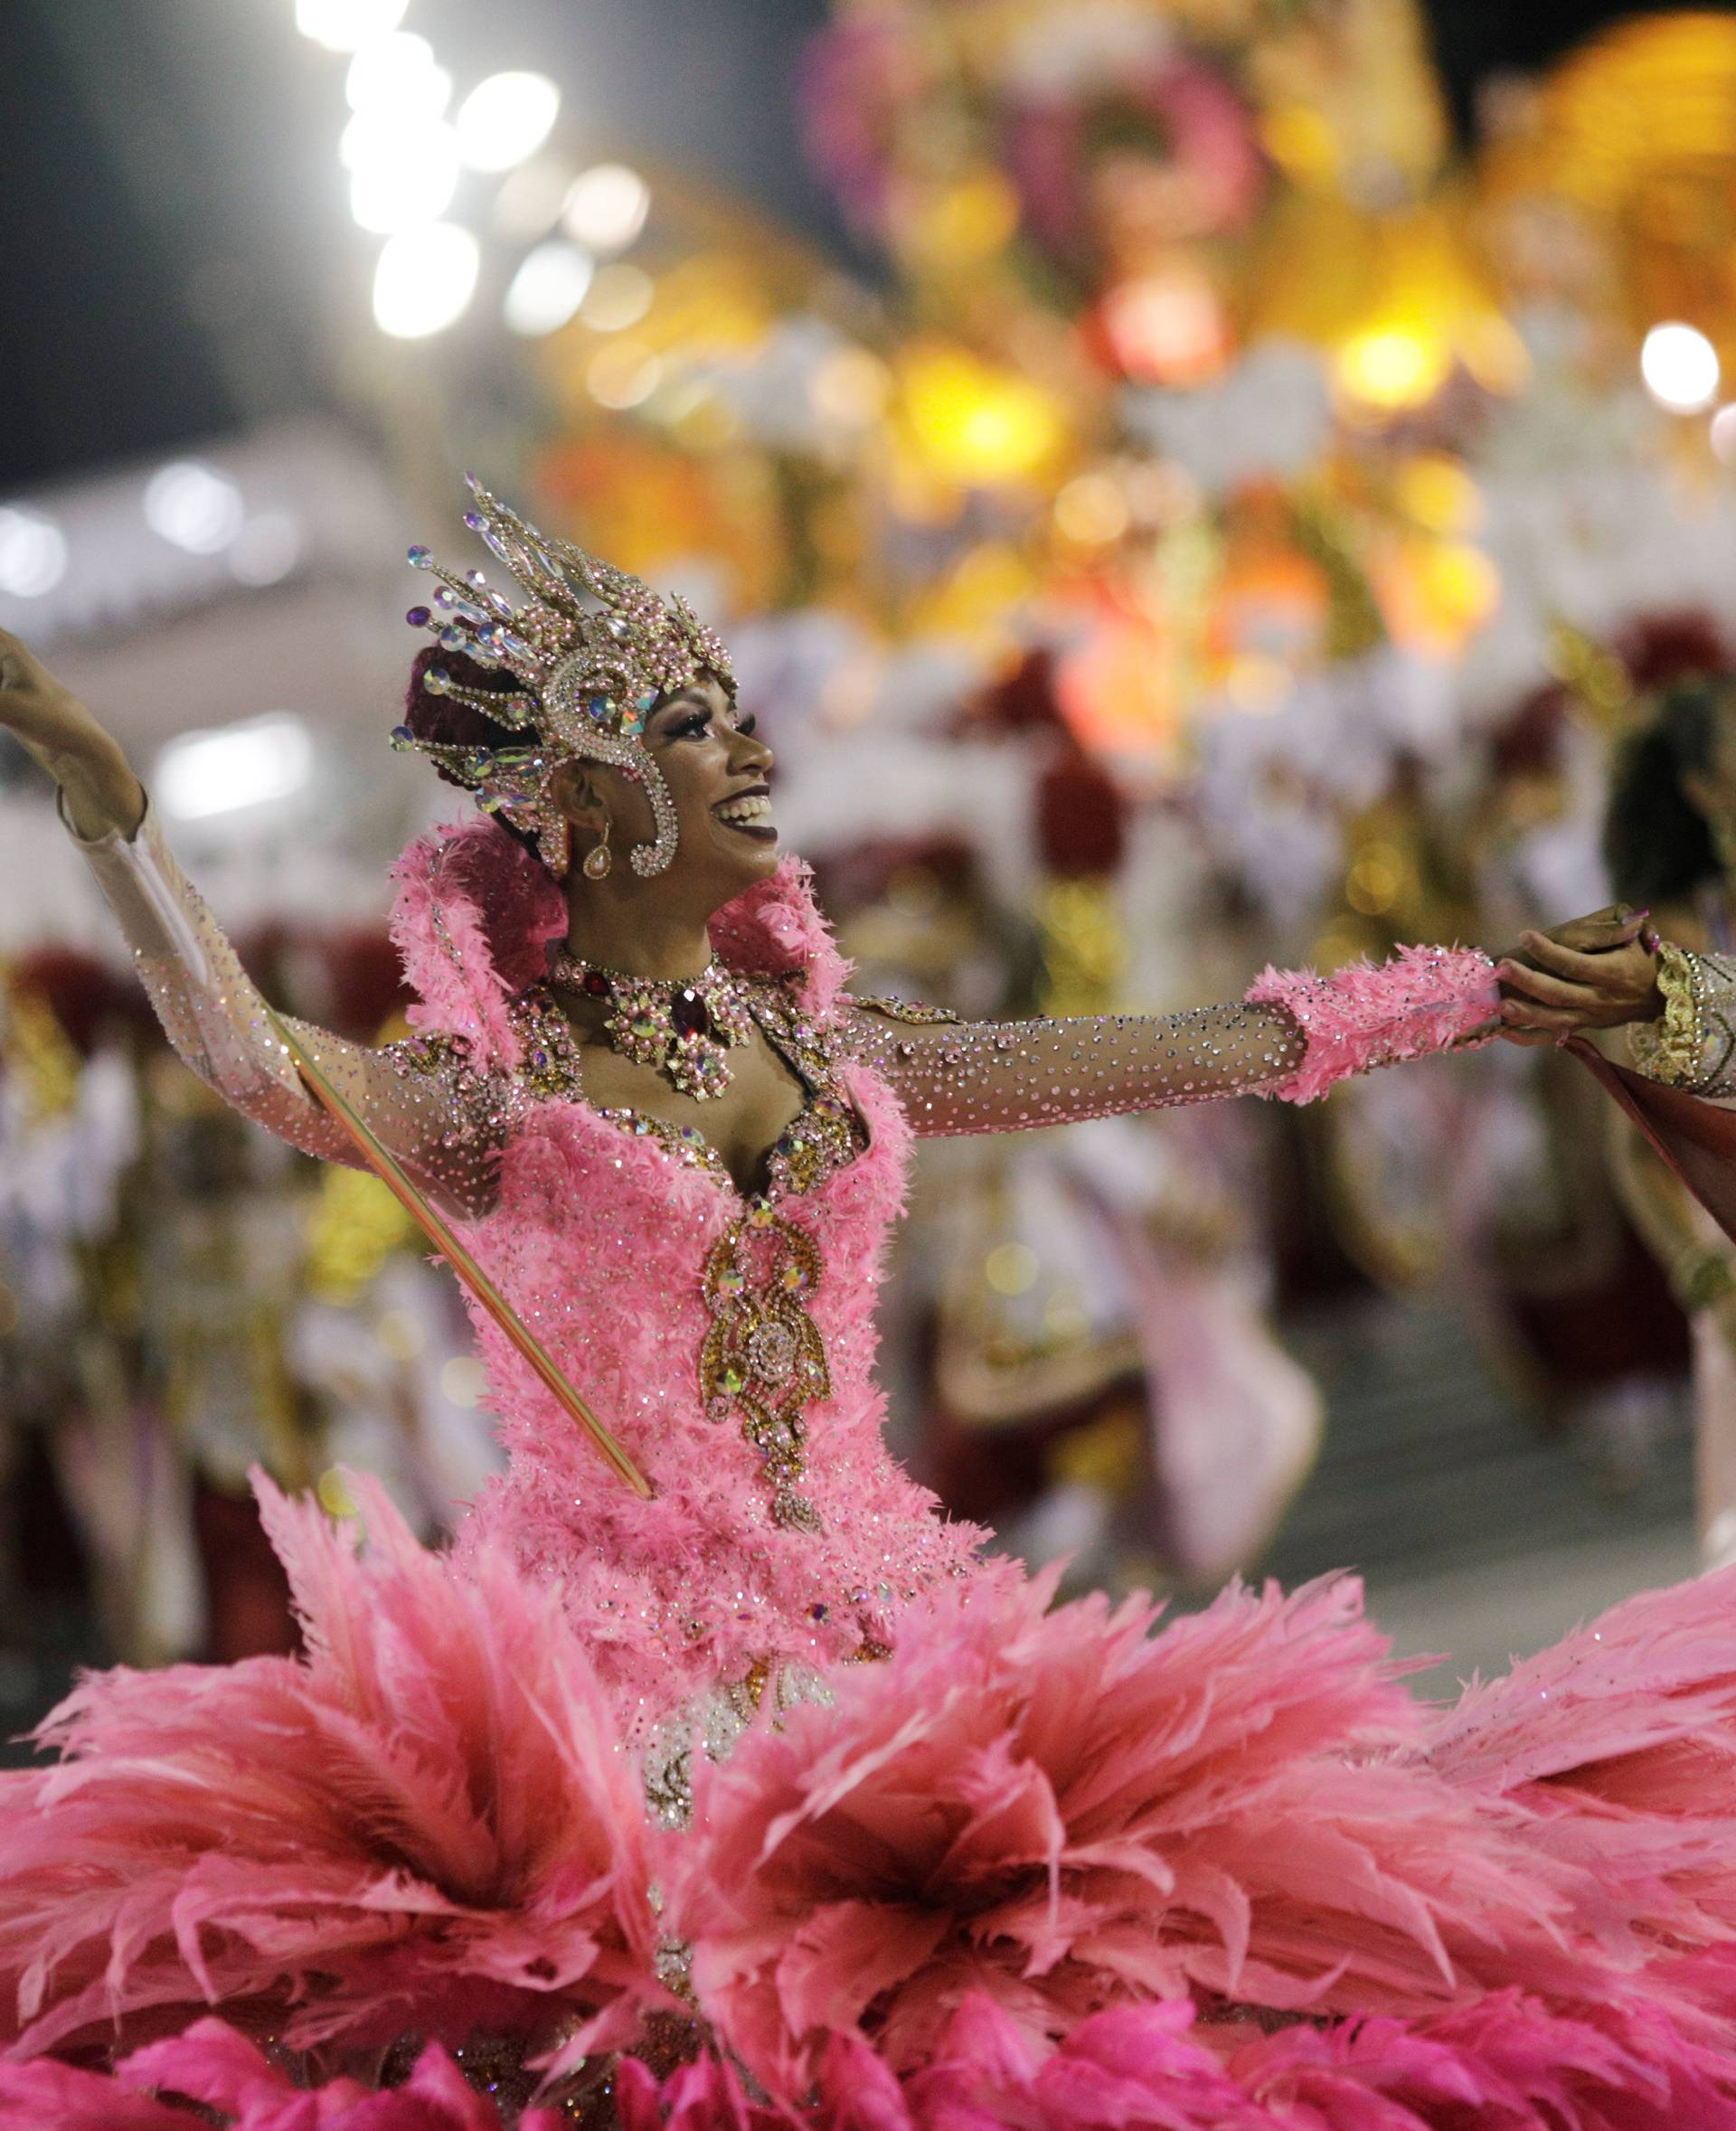 Revellers from Uniao da Ilha Samba school perform during the second night of the Carnival parade at the Sambadrome in Rio de Janeiro